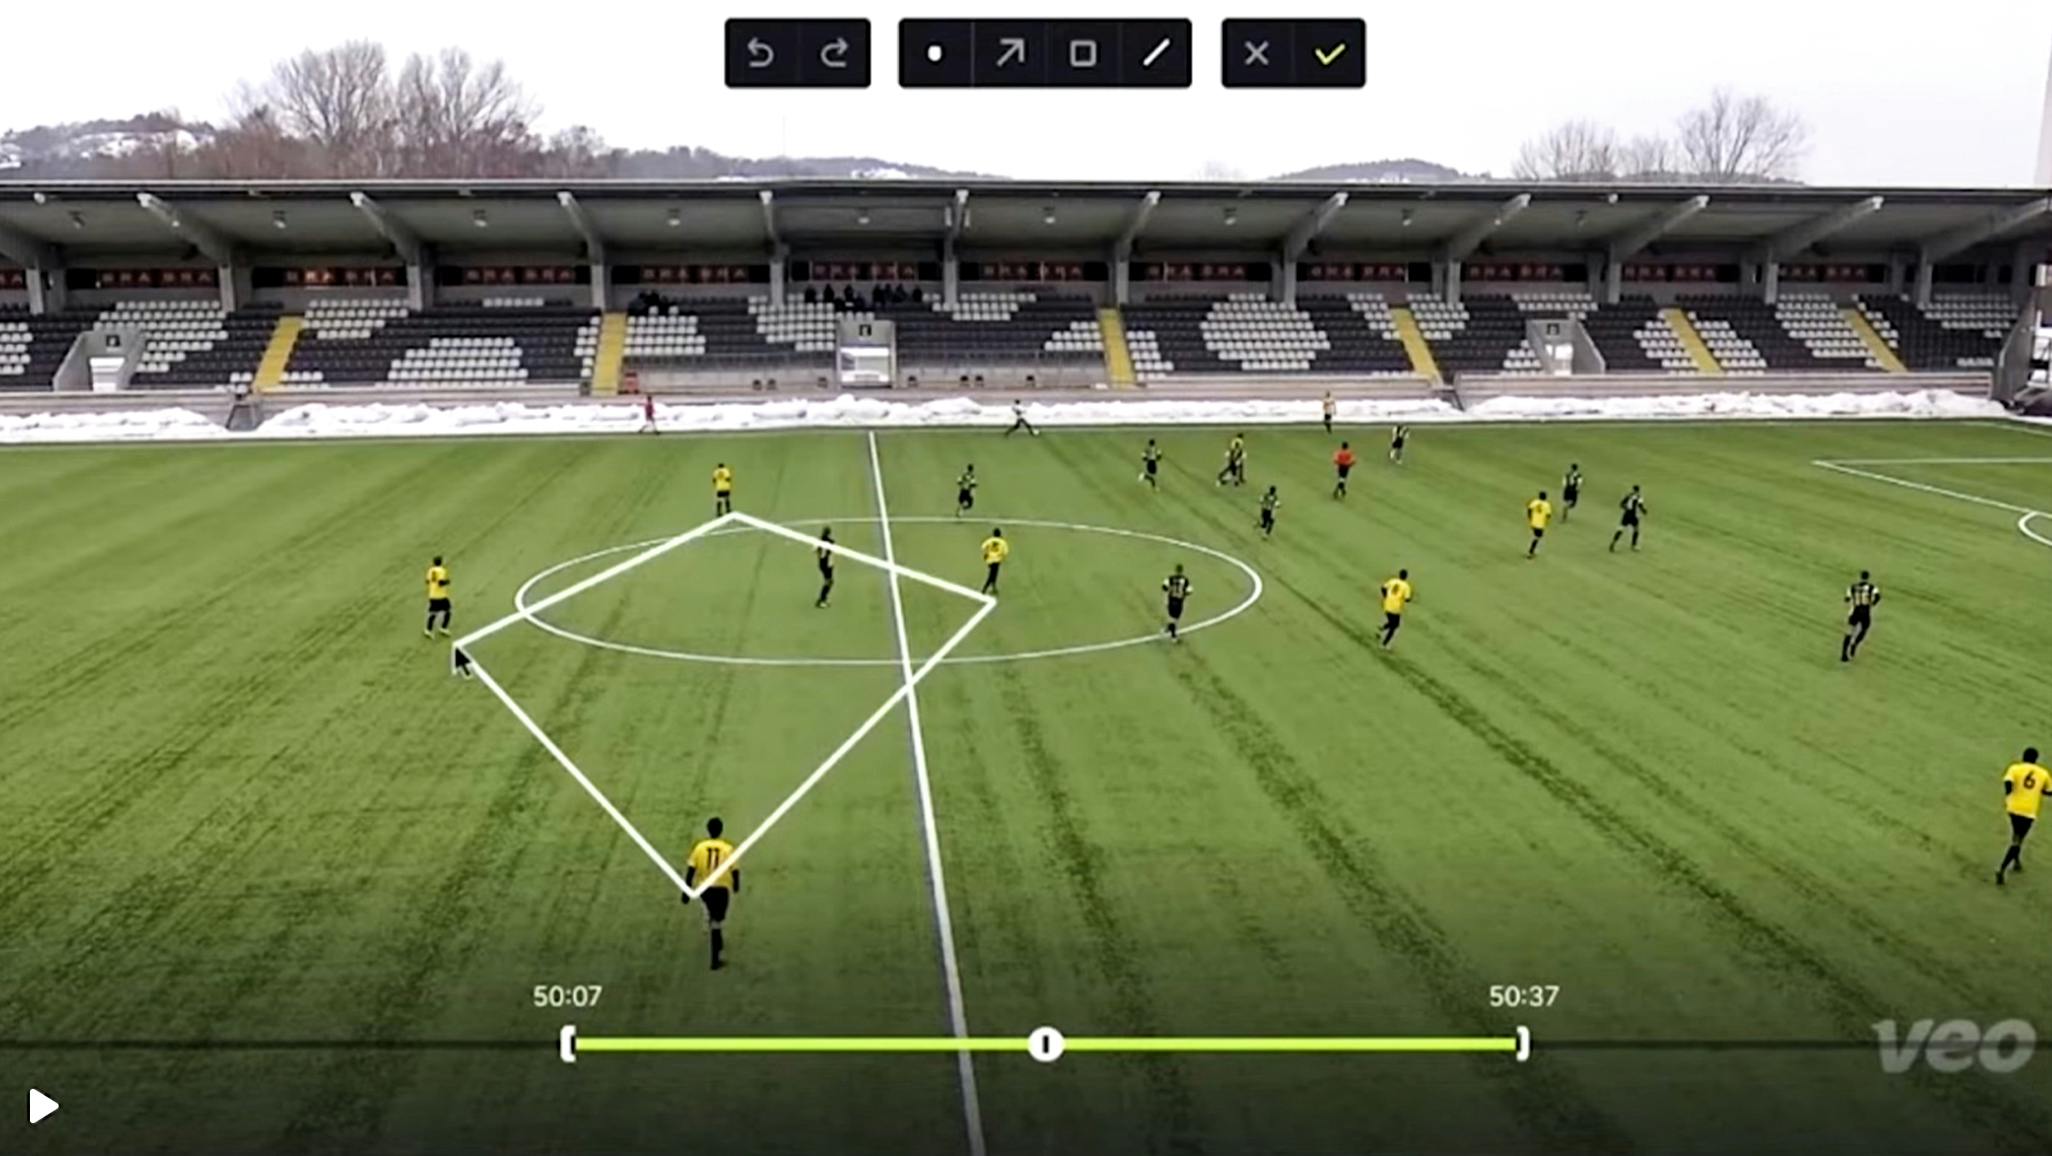 Video sports editor interface, allowing for in-depth soccer match analysis